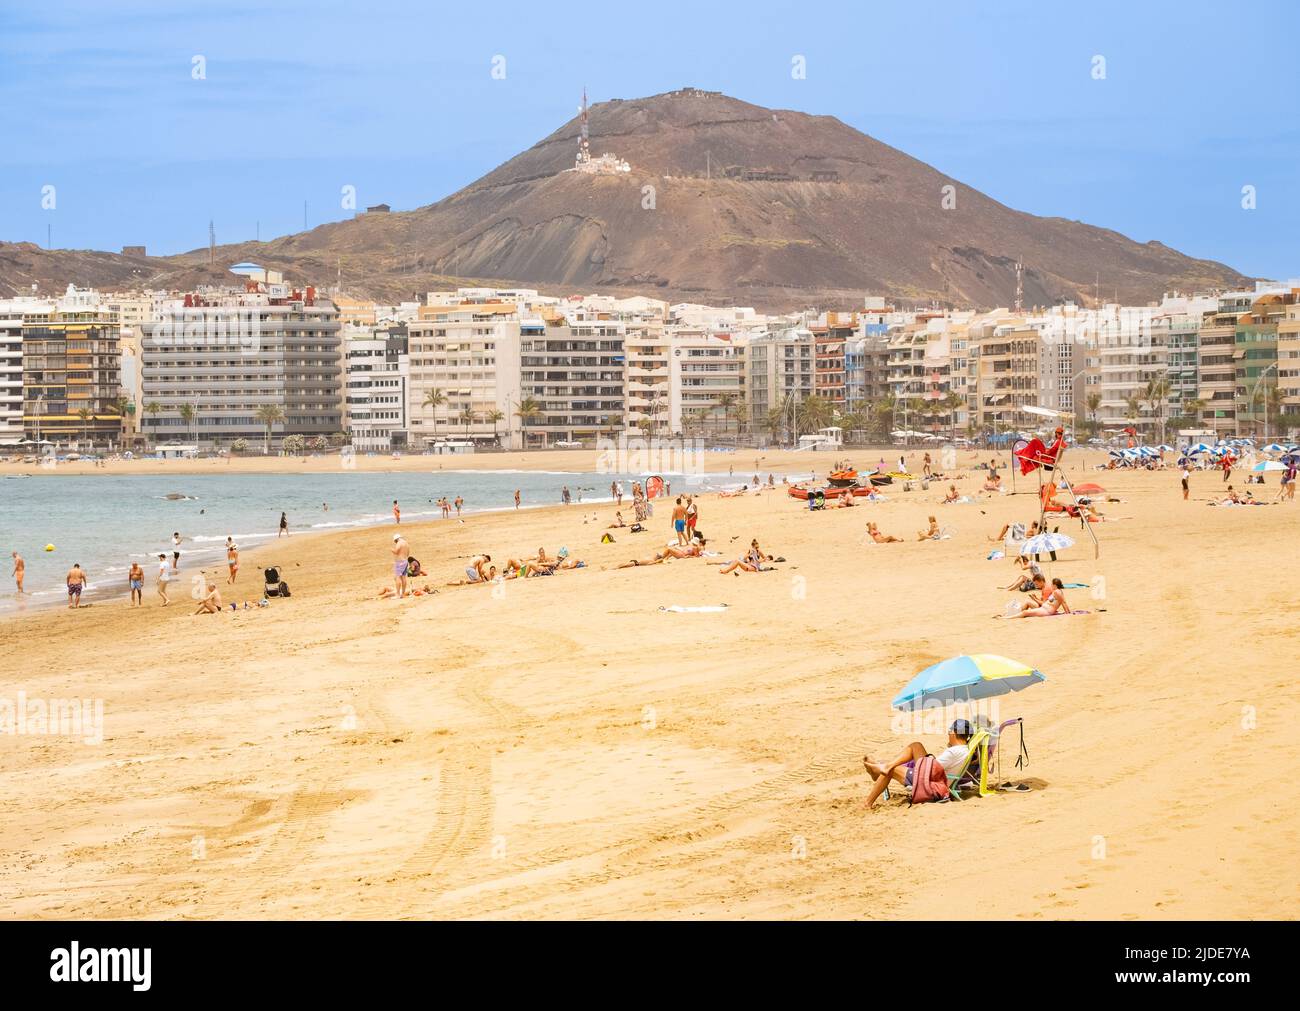 Las Palmas, Gran Canaria, Canary Islands, Spain. 20th June, 2022. Tourists,  many from the UK, bask on the city beach in Las Palmas on Gran Canaria.  Credit: Alan Dawson/ Alamy Live News